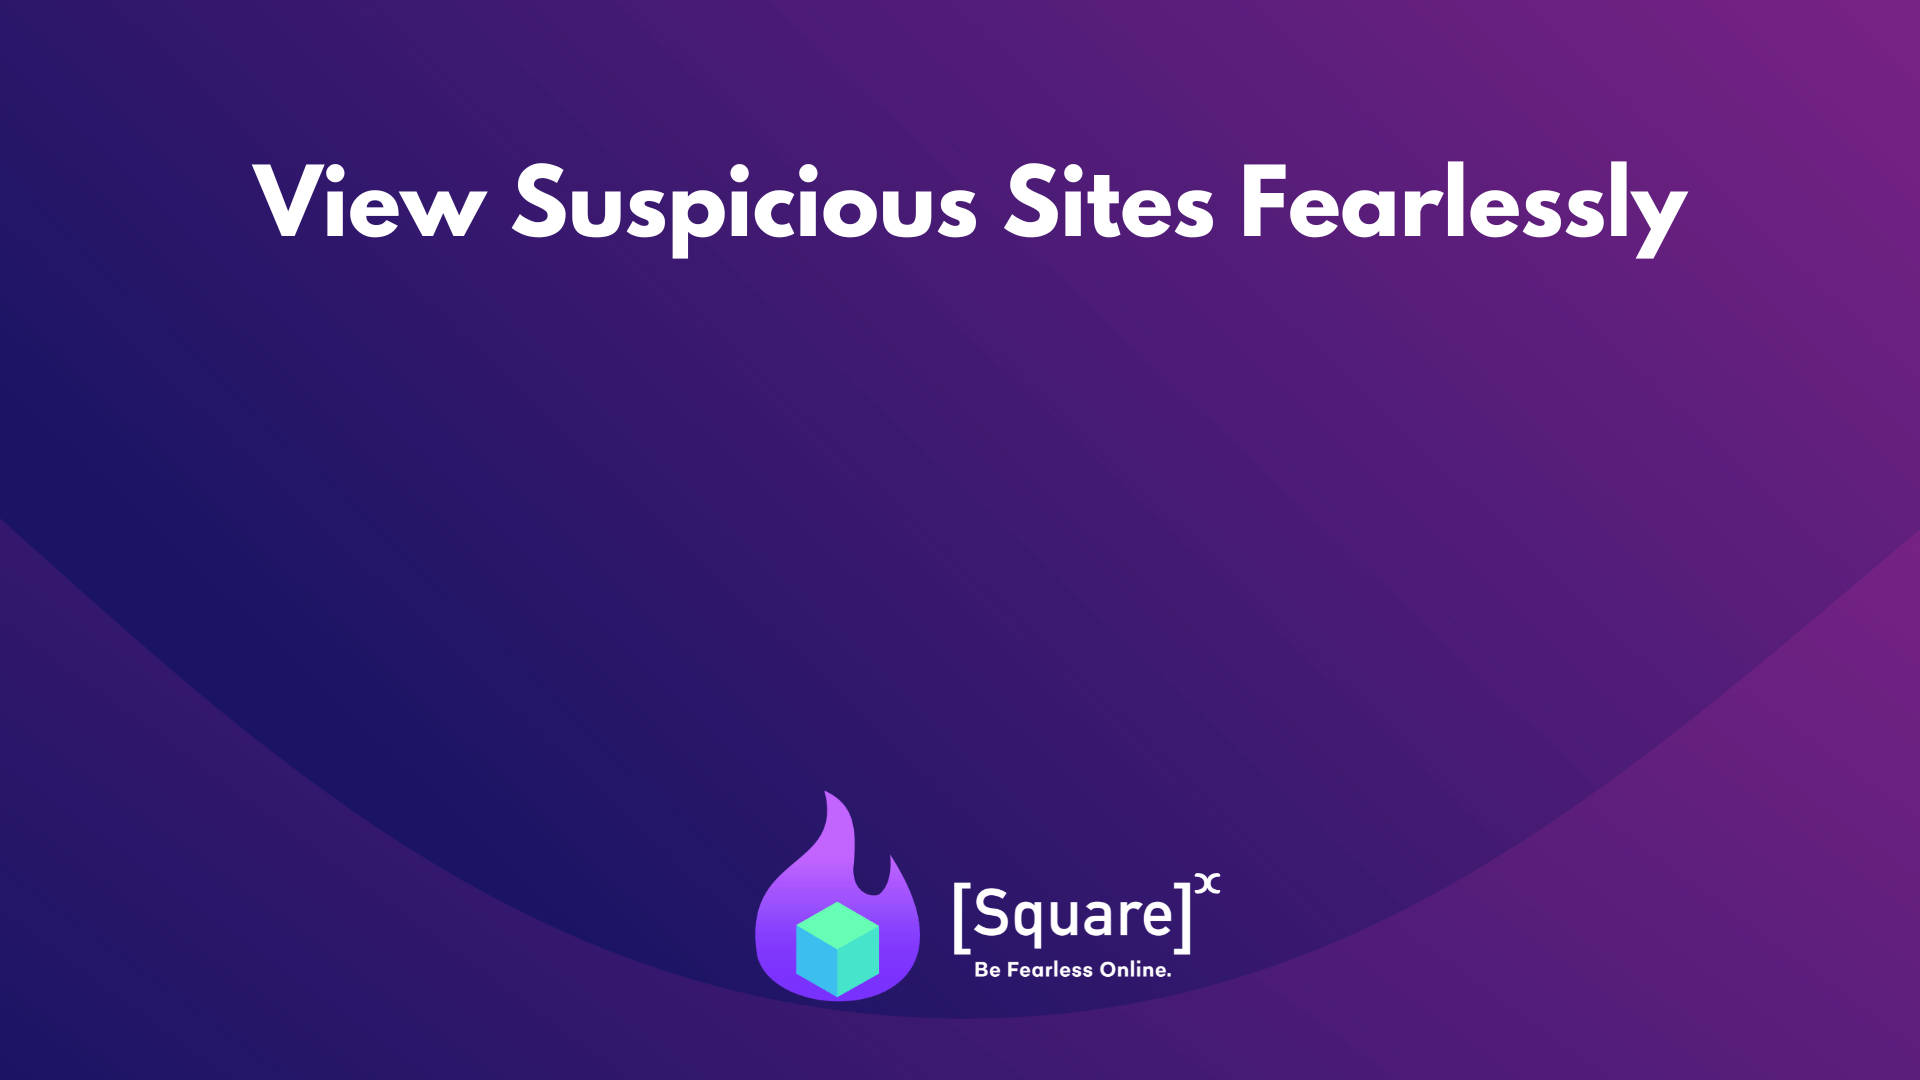 View suspicious sites fearlessly